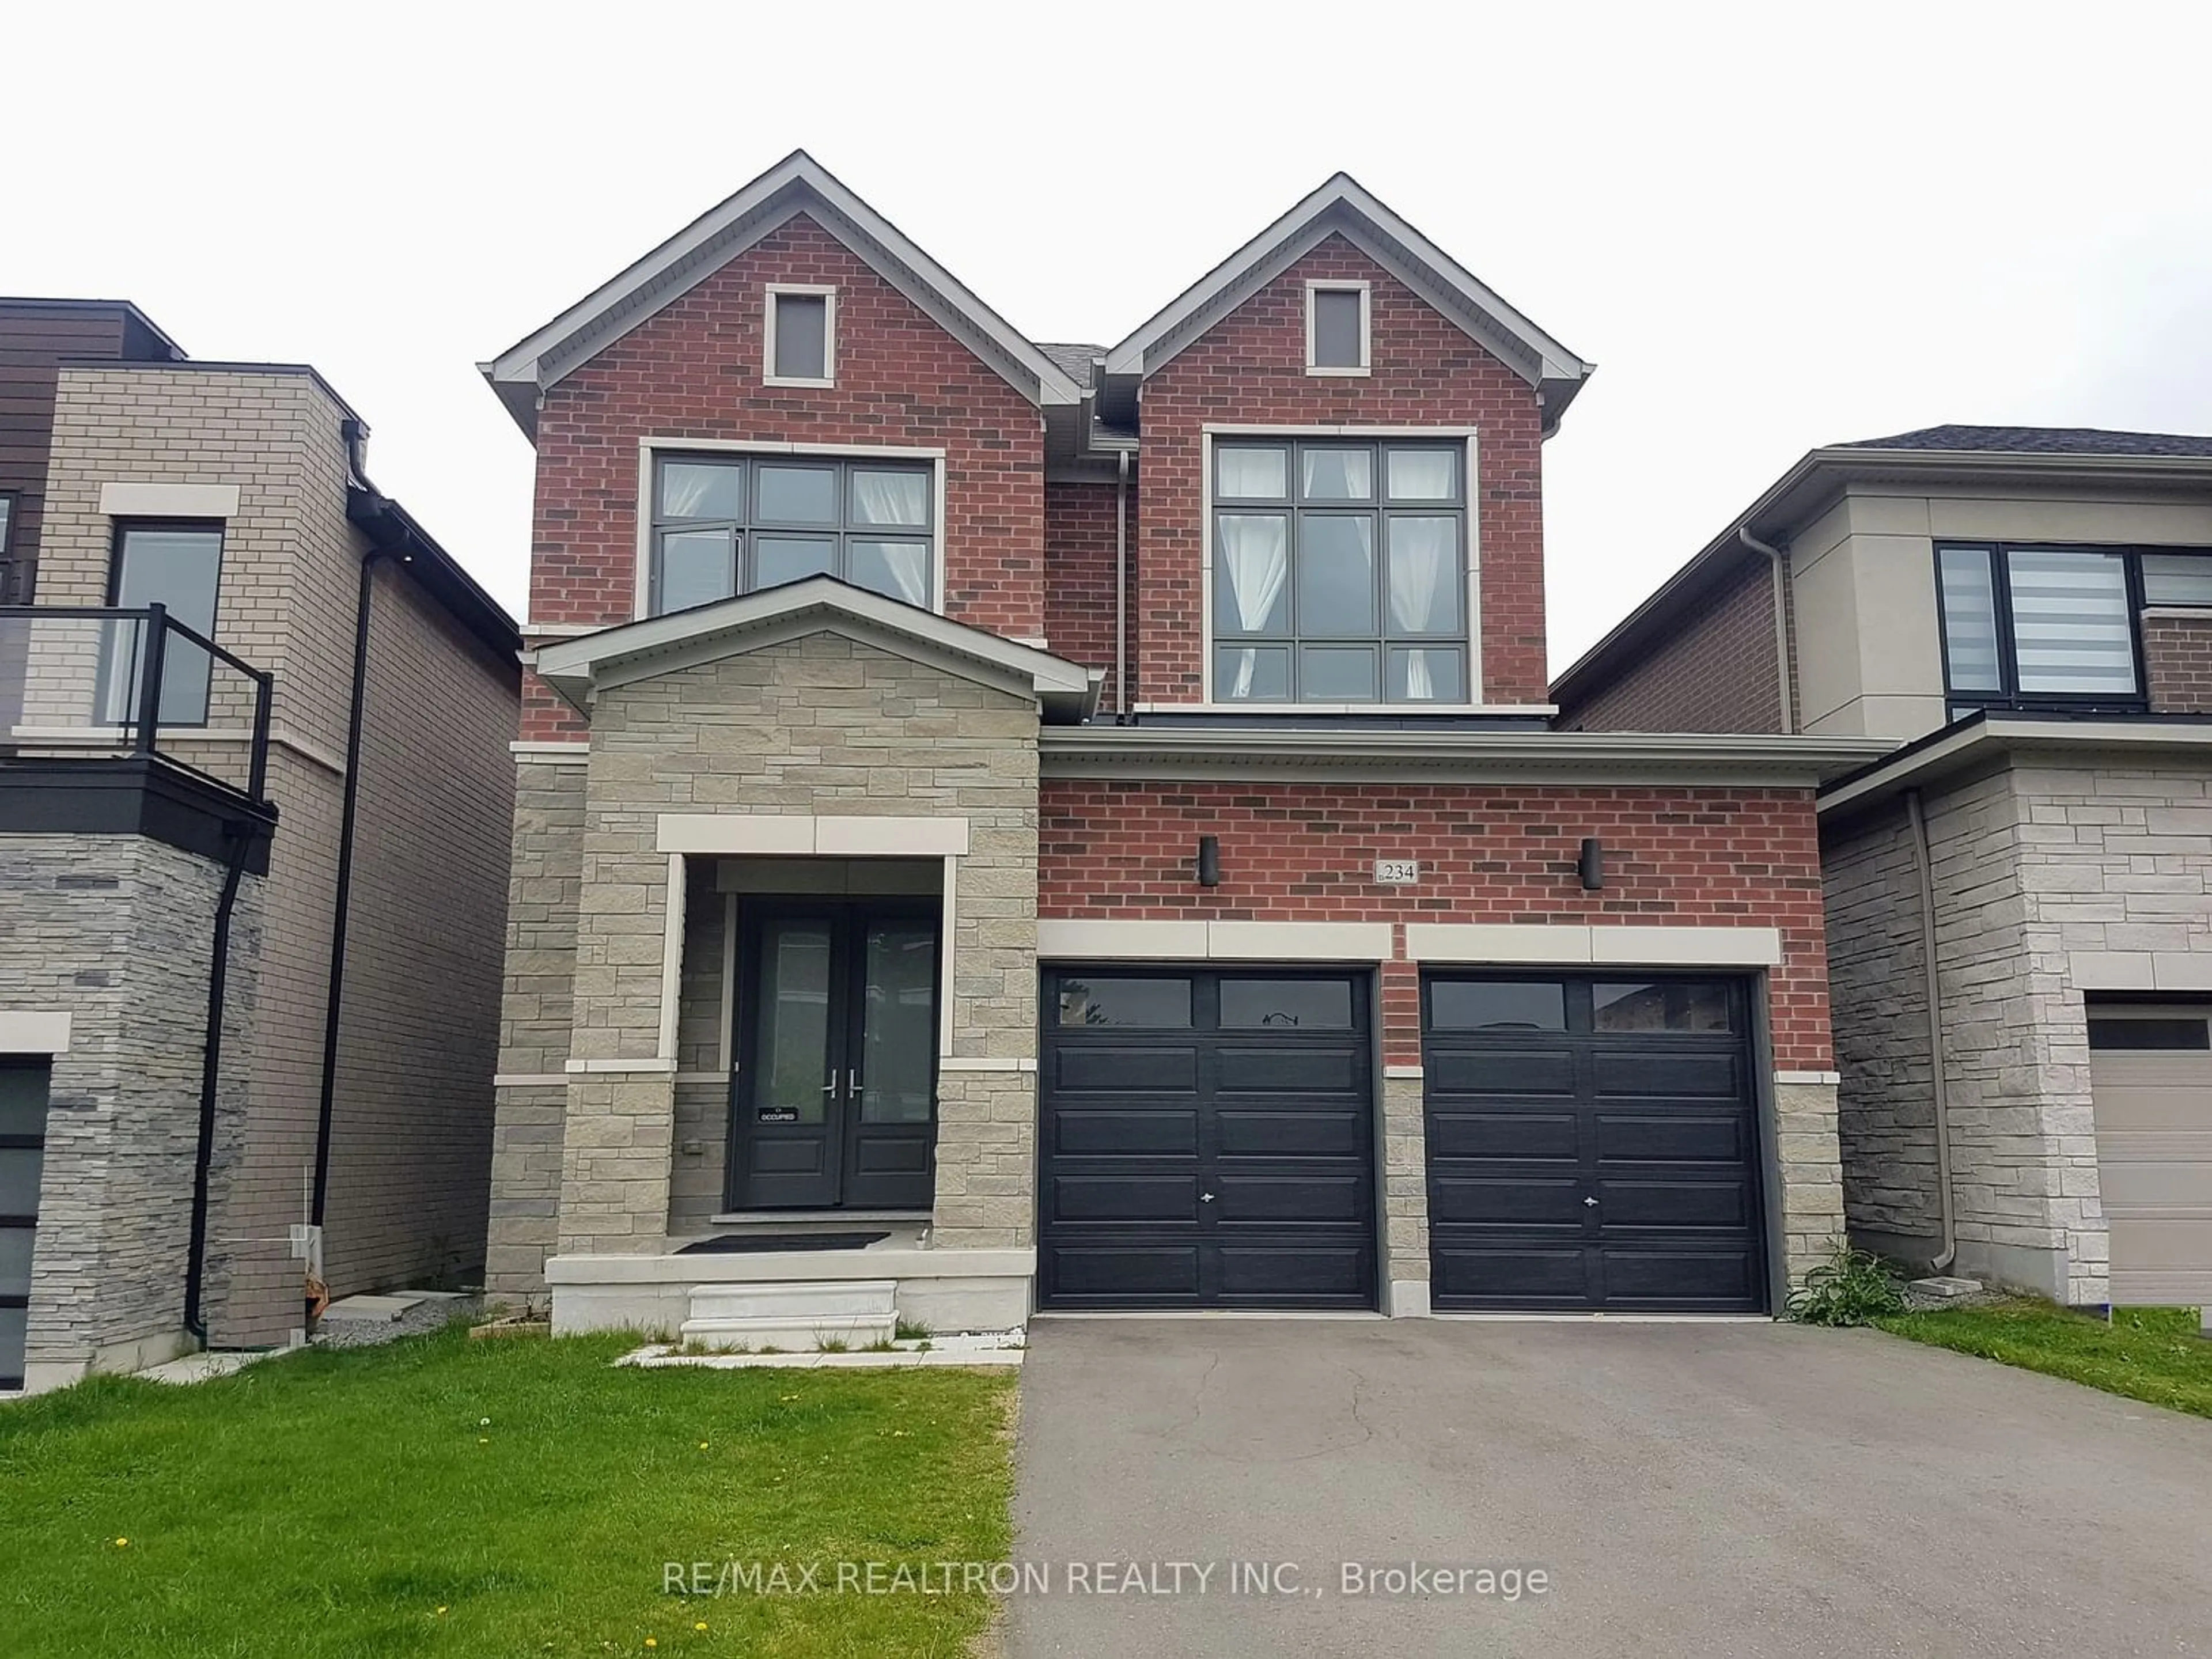 Home with brick exterior material for 234 Factor St, Vaughan Ontario L4H 5C1